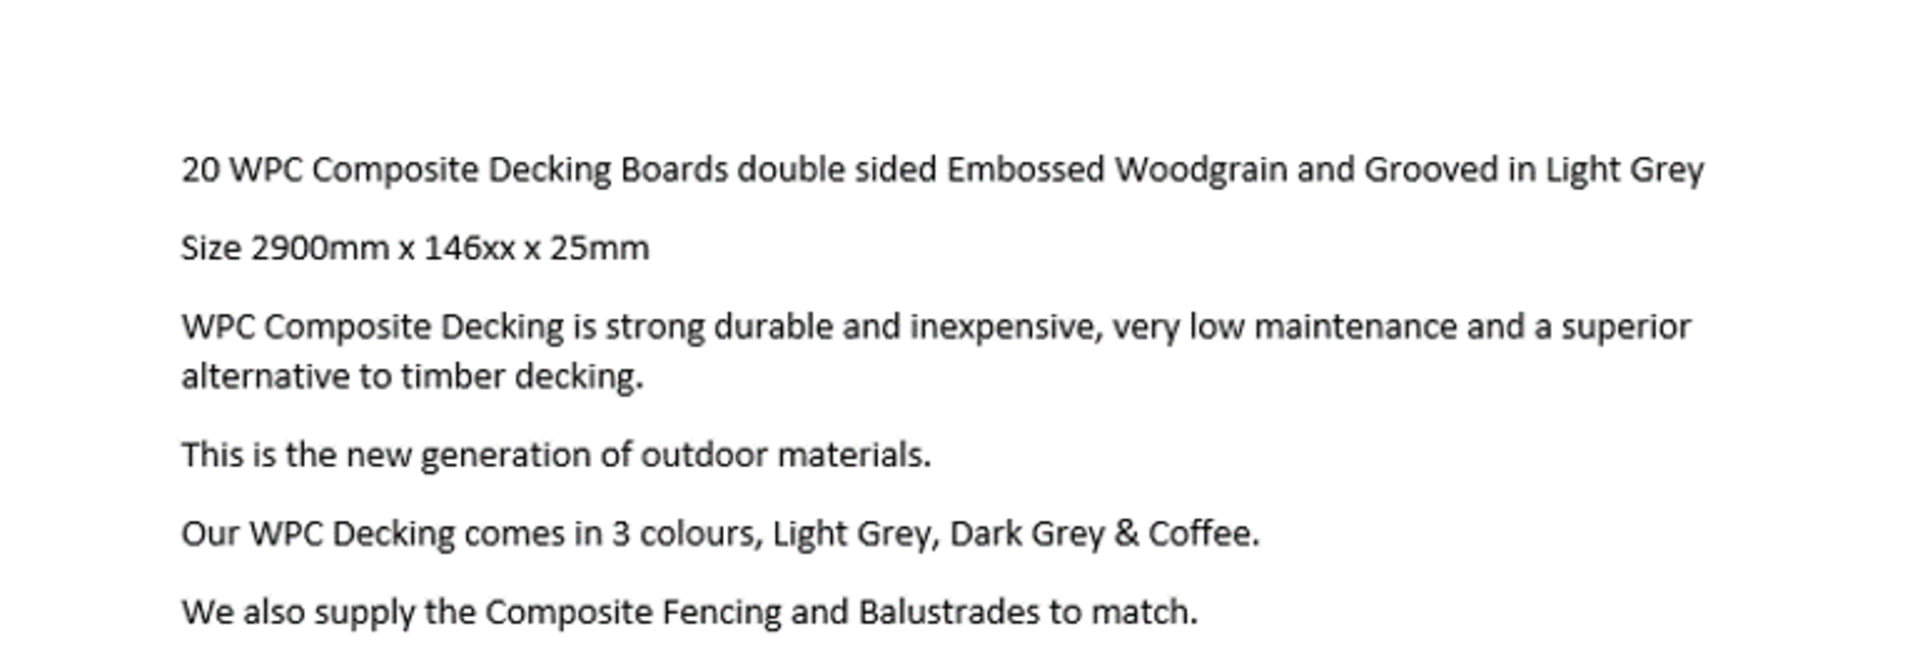 * 20 WPC Composite Light Grey Double sided Embossed Woodgrain Decking Boards 2900mm x 146mm x 25mm - Image 5 of 5